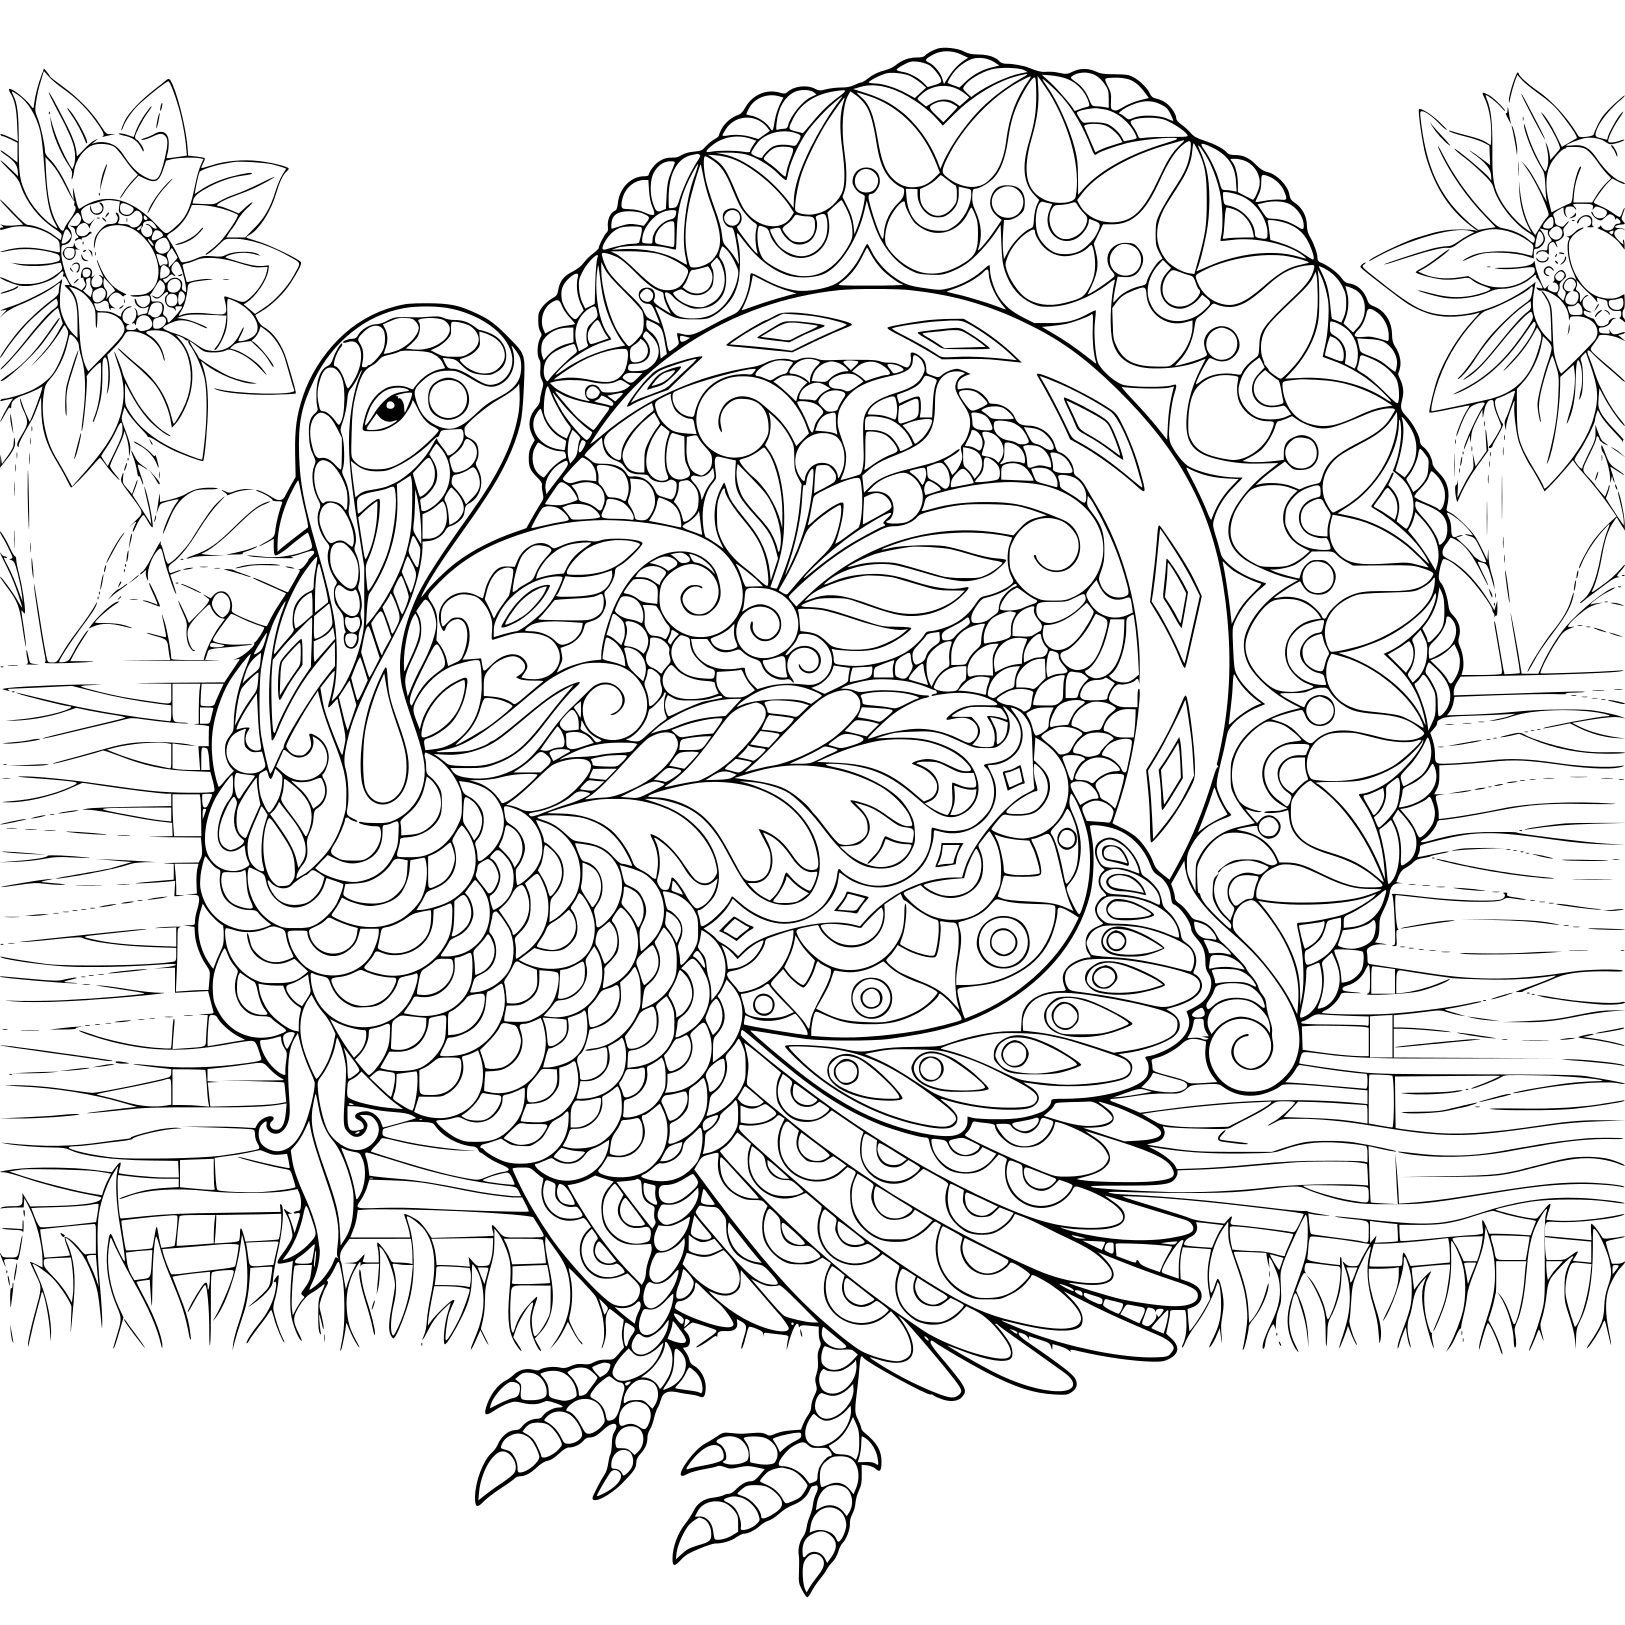 Turkey And Sunflowers On The Farm Yard Coloring Page